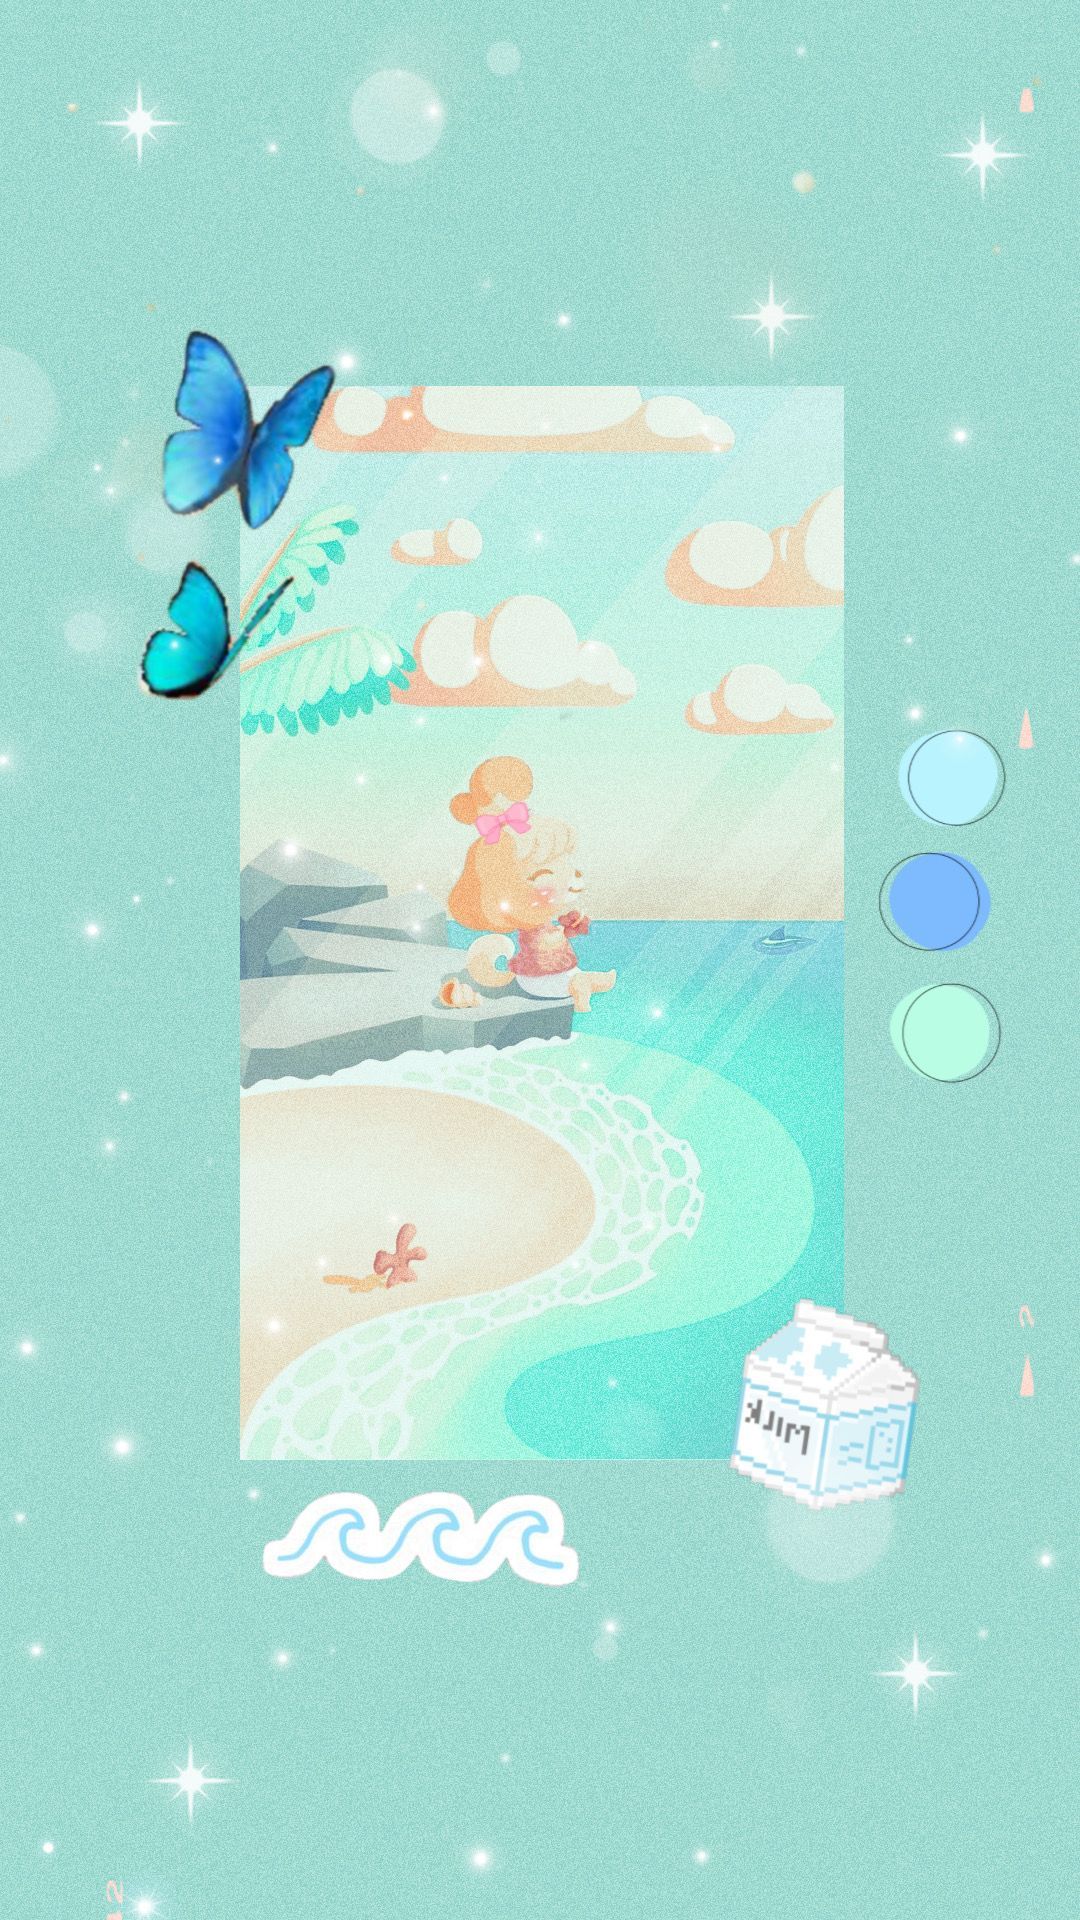 A picture of the beach with some butterflies - Animal Crossing